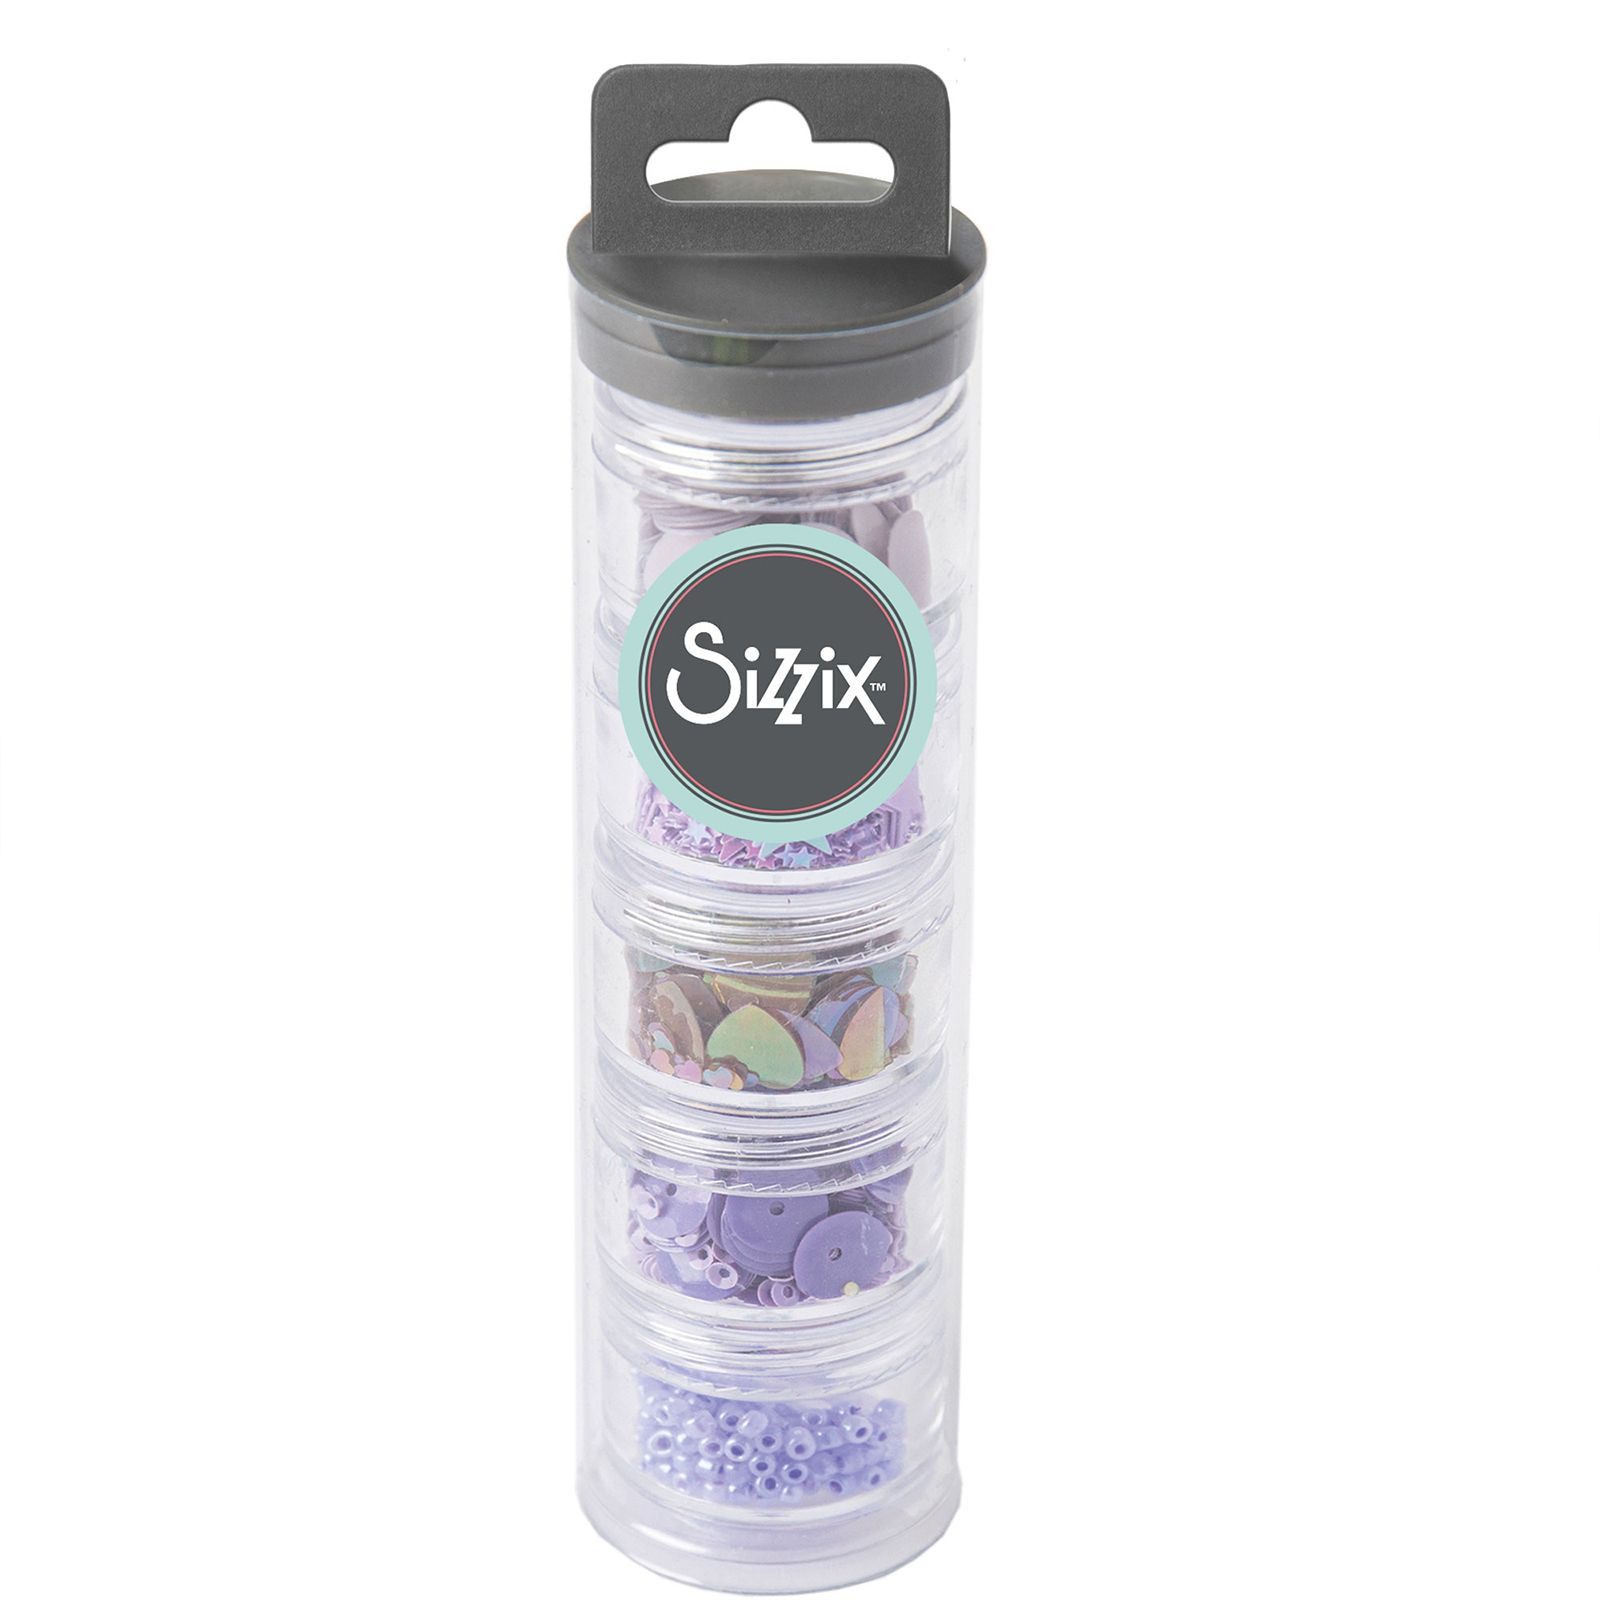 Sizzix • Making Essential Sequins & Beads Lavender Dust 5PK